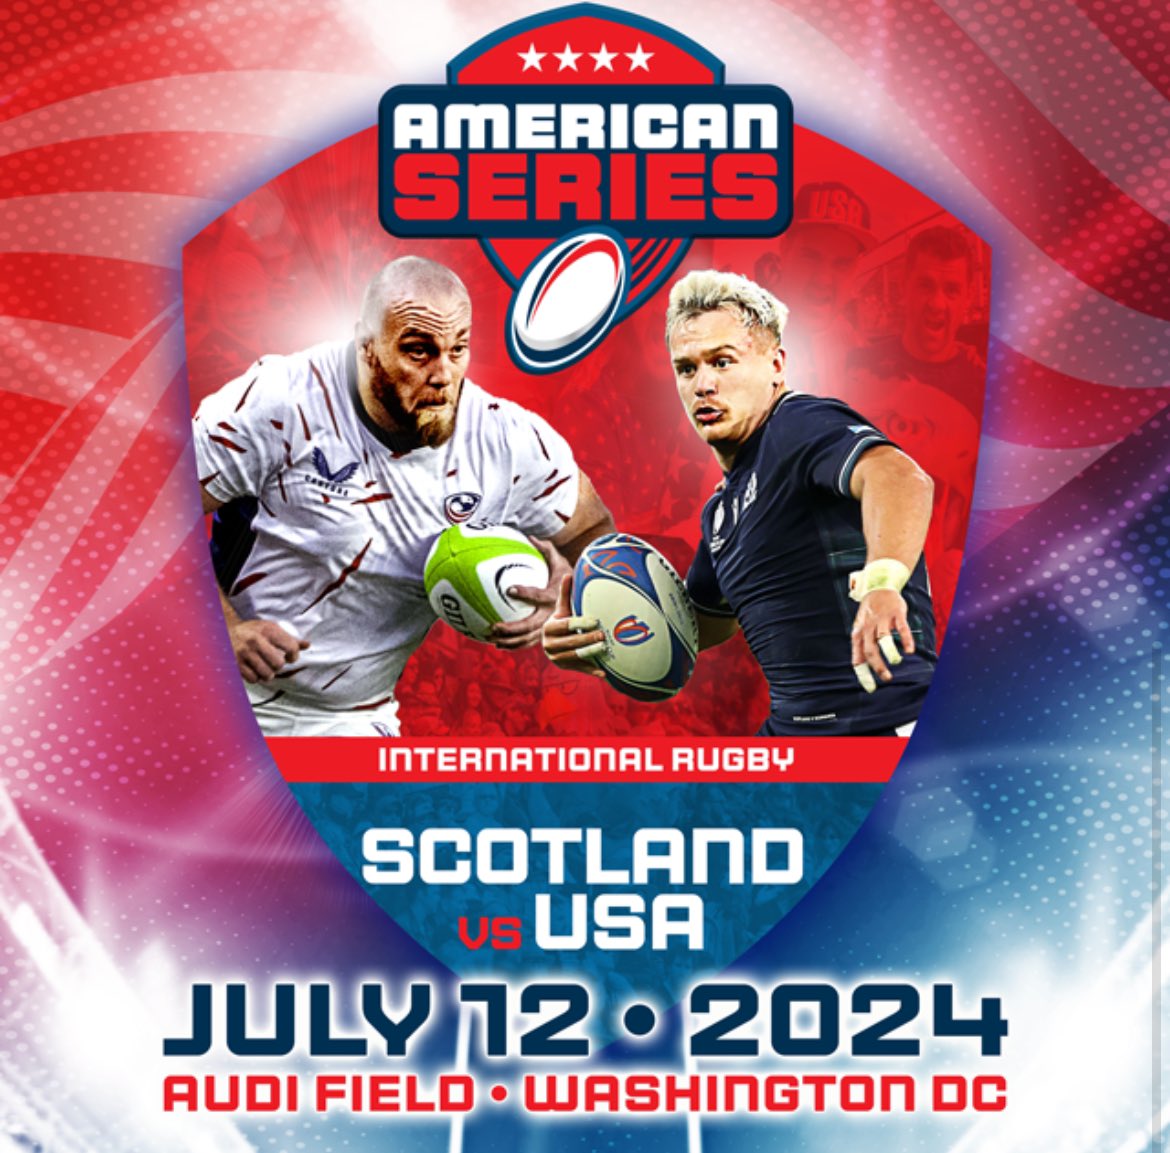 🏉 @USARugby Mens vs @Scotlandteam Men’s 🏟️ @AudiField, Washington DC 🗓️ Friday 12 July 🎟️ Available at lnkd.in/eYbtn926 If you’re passing hope to see you there at THE big US rugby event in 2024! (there’s a few others going on too)